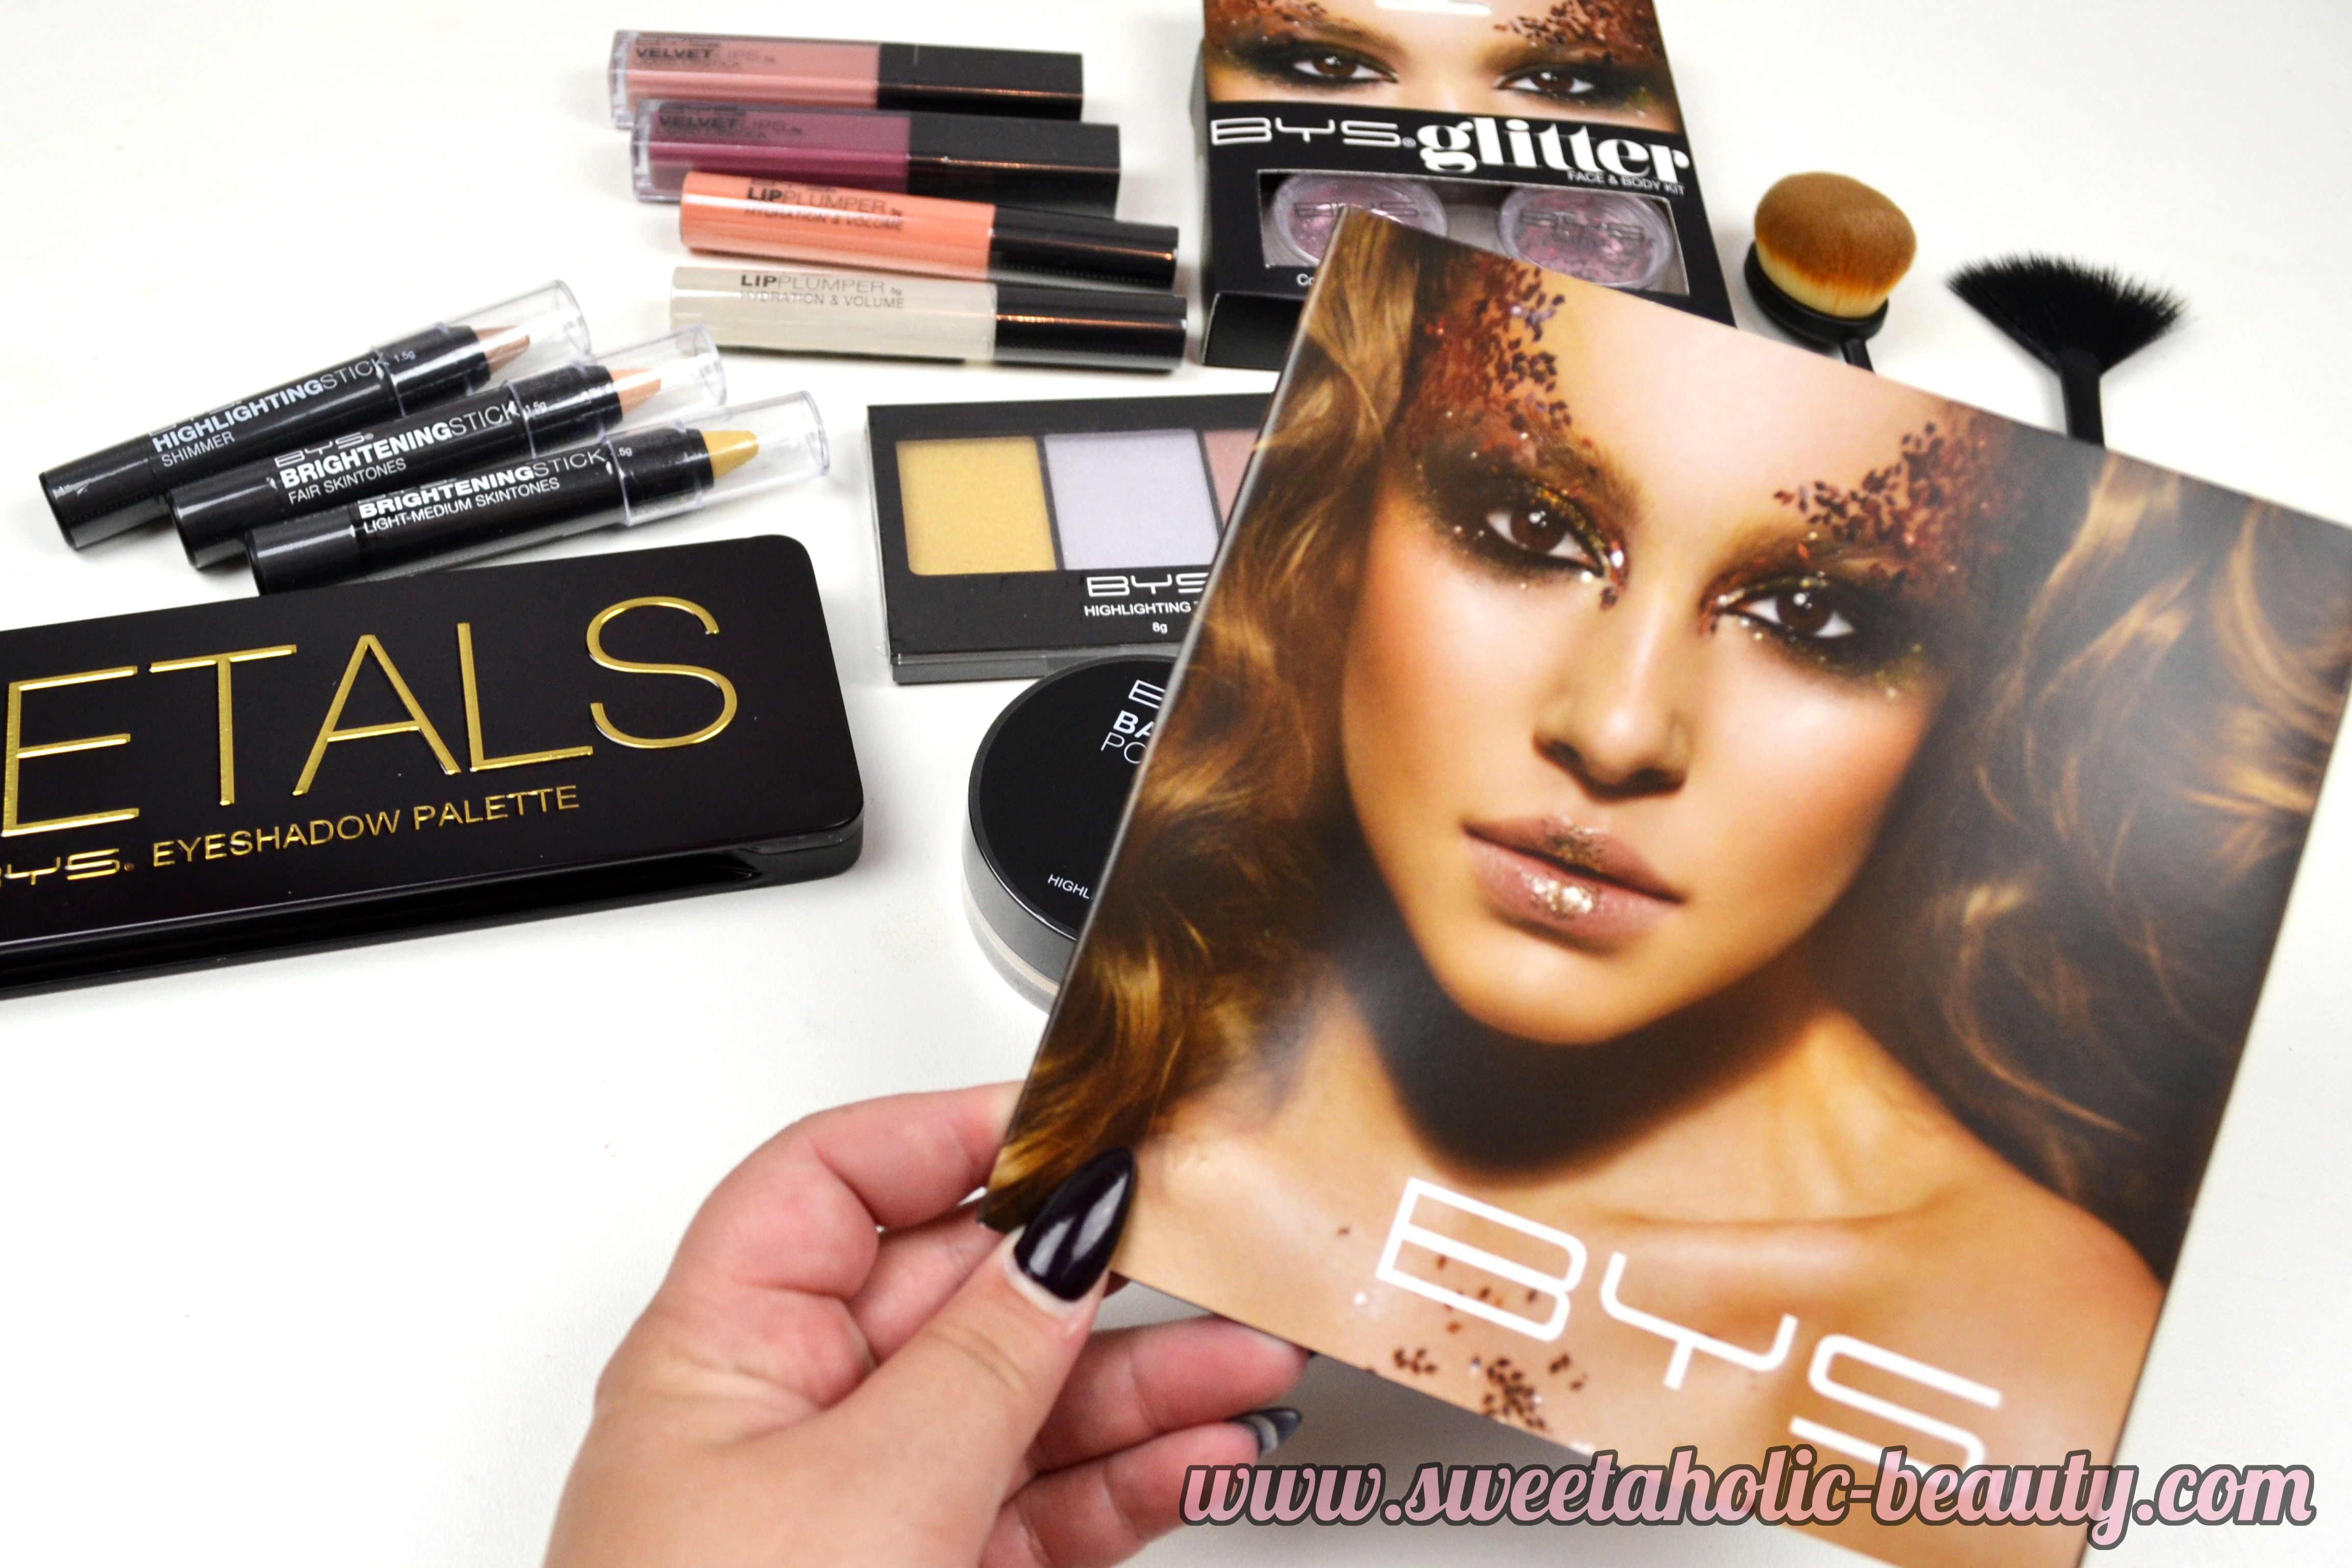 BYS Cosmetics Girls Night Out at Hoyts Goody Bag - Sweetaholic Beauty